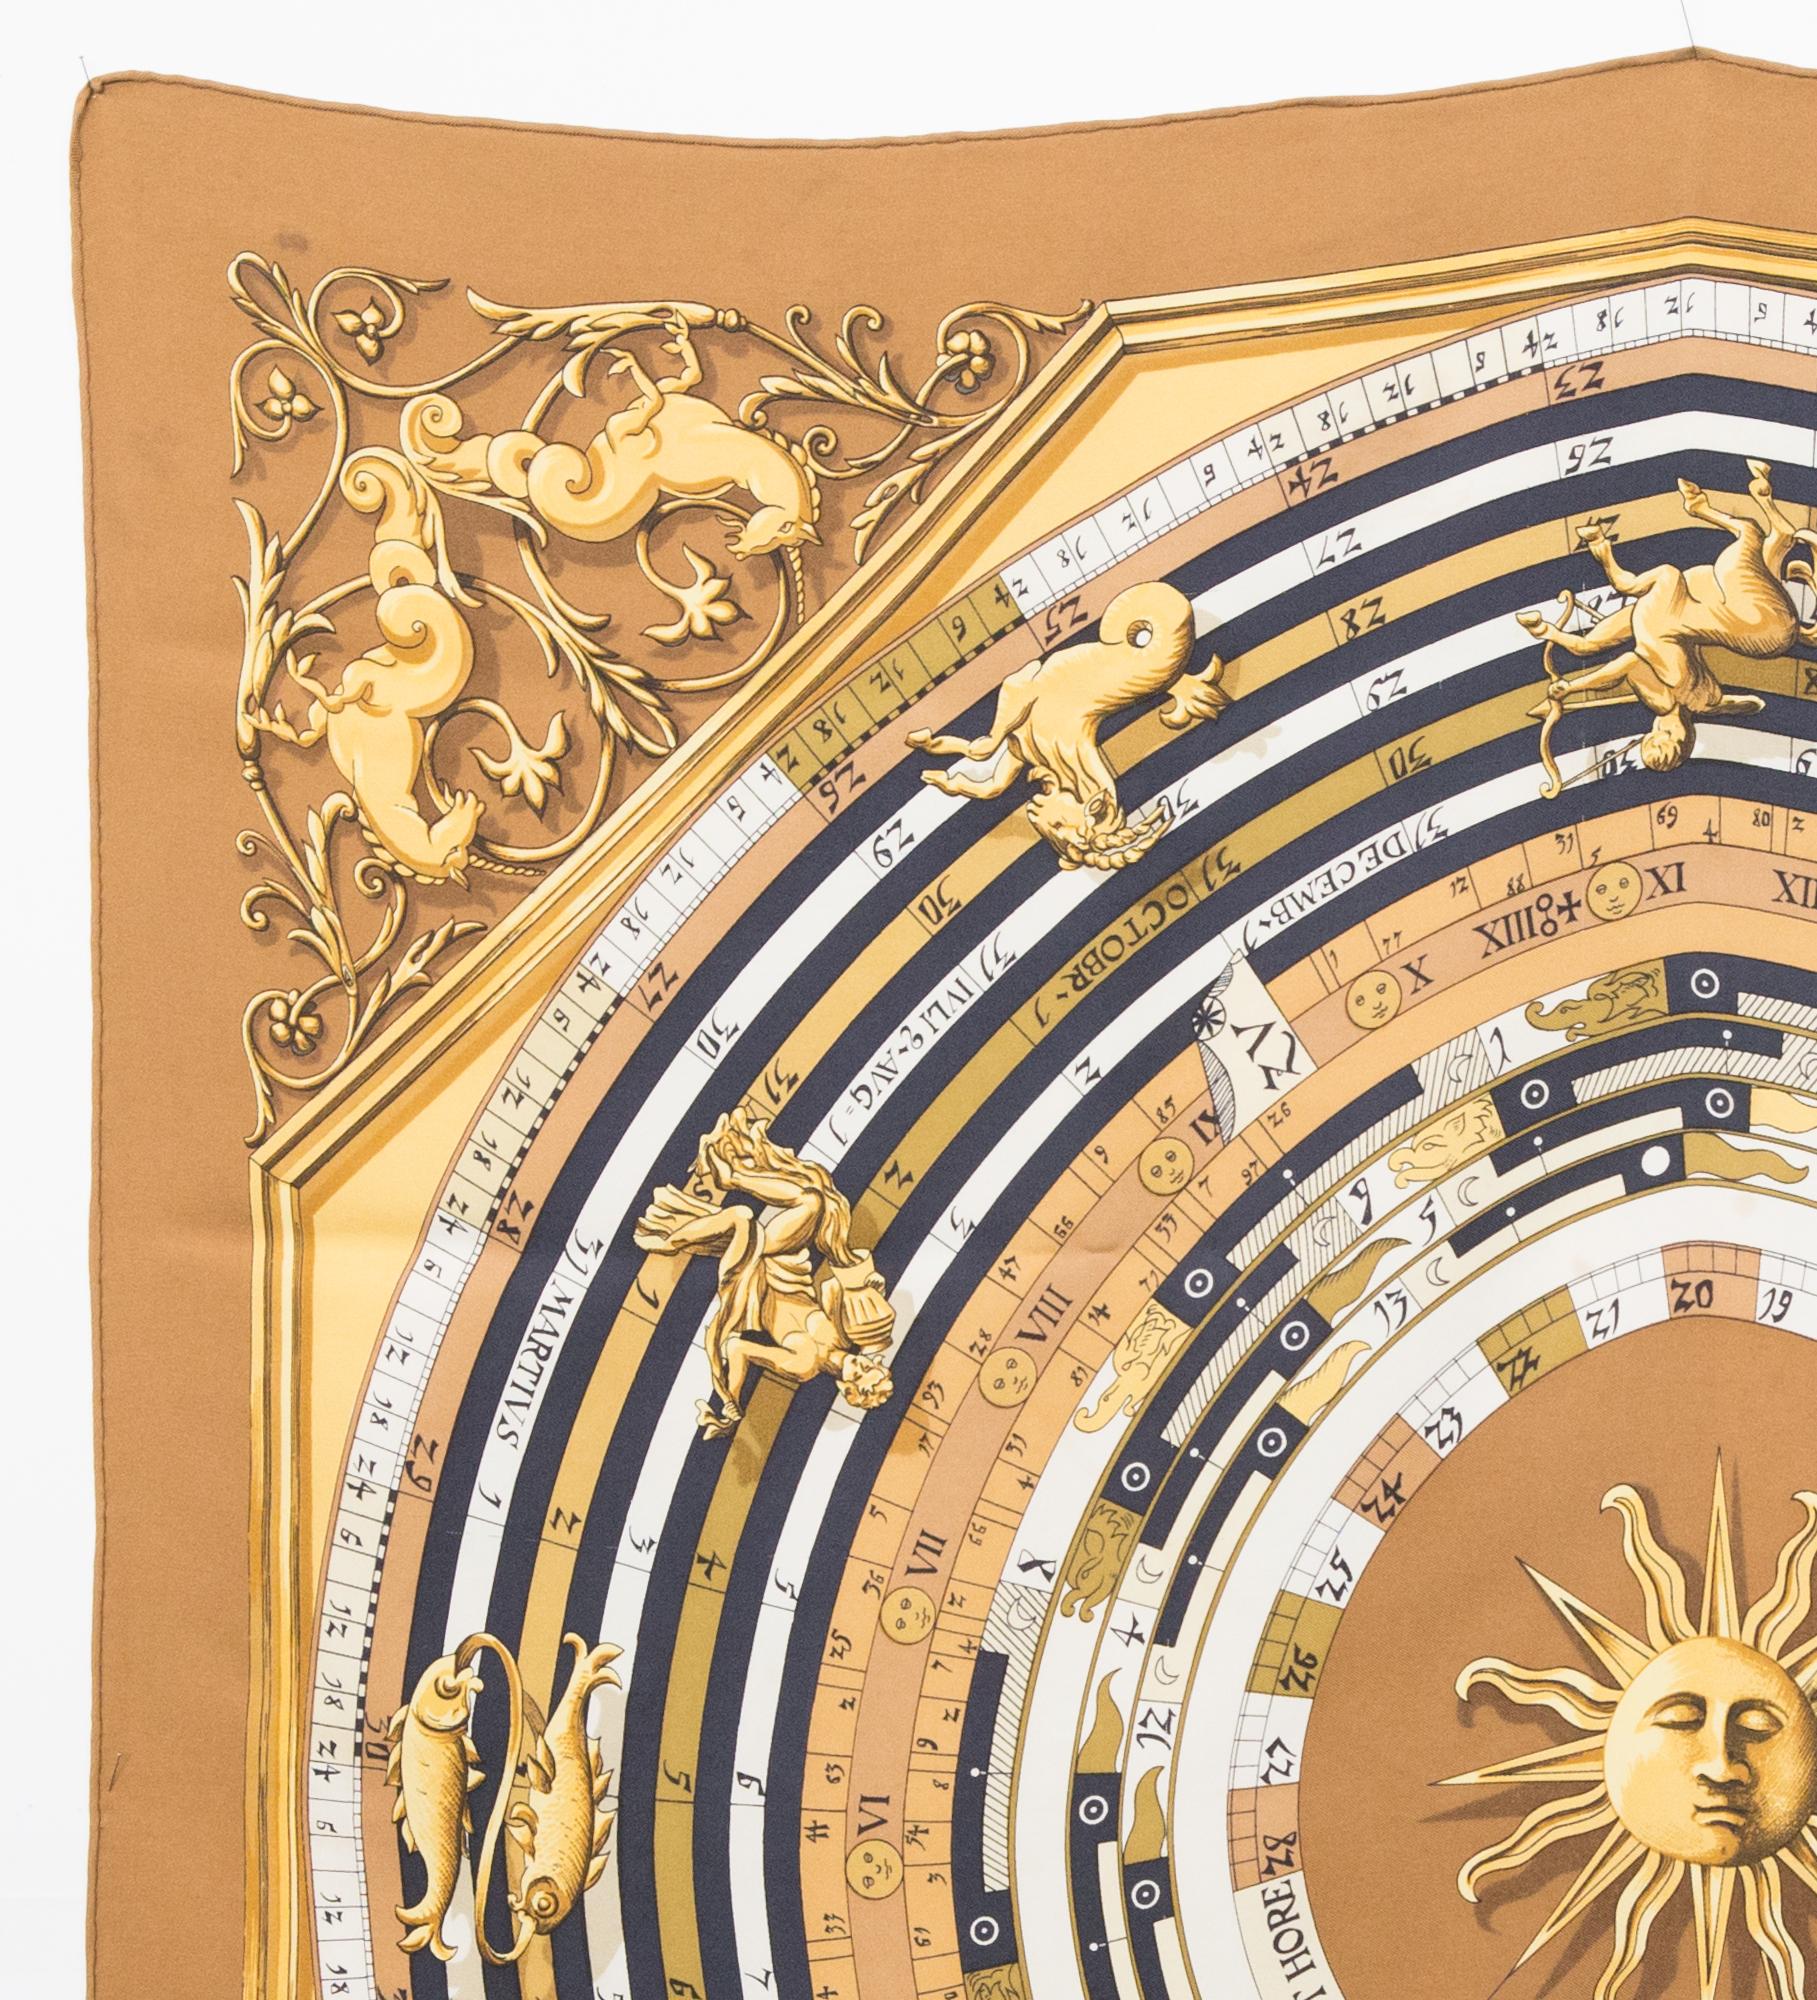 Hermes silk scarf camel  “Dies et Hore” (Astrology) by Francoise Faconnet featuring sun, moon Astrology & Renaissance scene, a camel border and a Hermès signature.   
Circa 1988s 
In good vintage condition. Made in France.
35,4in. (90cm)  X 35,4in.